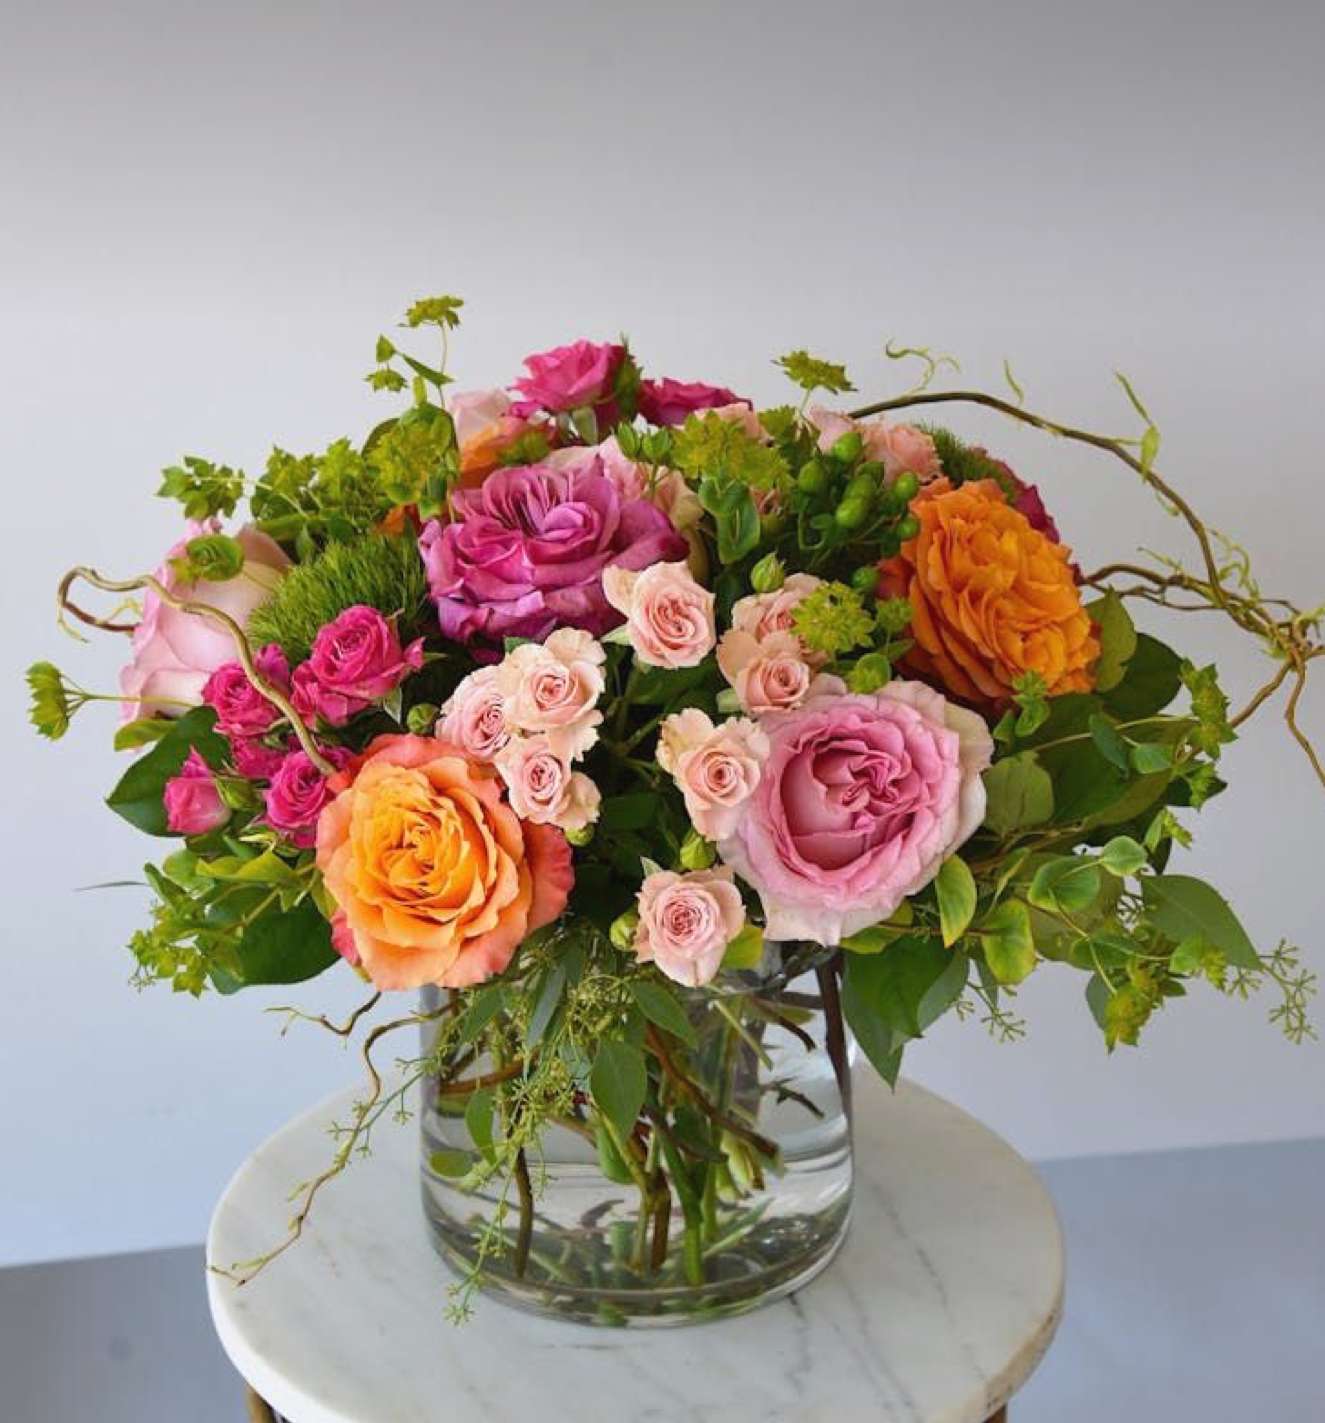 Color Me Rosy  - A lush and beautiful collection of stunning premium roses with spray roses in vibrant hues of tangerine orange, ruffled mauve-pink rose and soft pink roses.  Accented with green hydrangea, seasonal blooms and foliage designed in a classic glass vase.  Simply lovely!